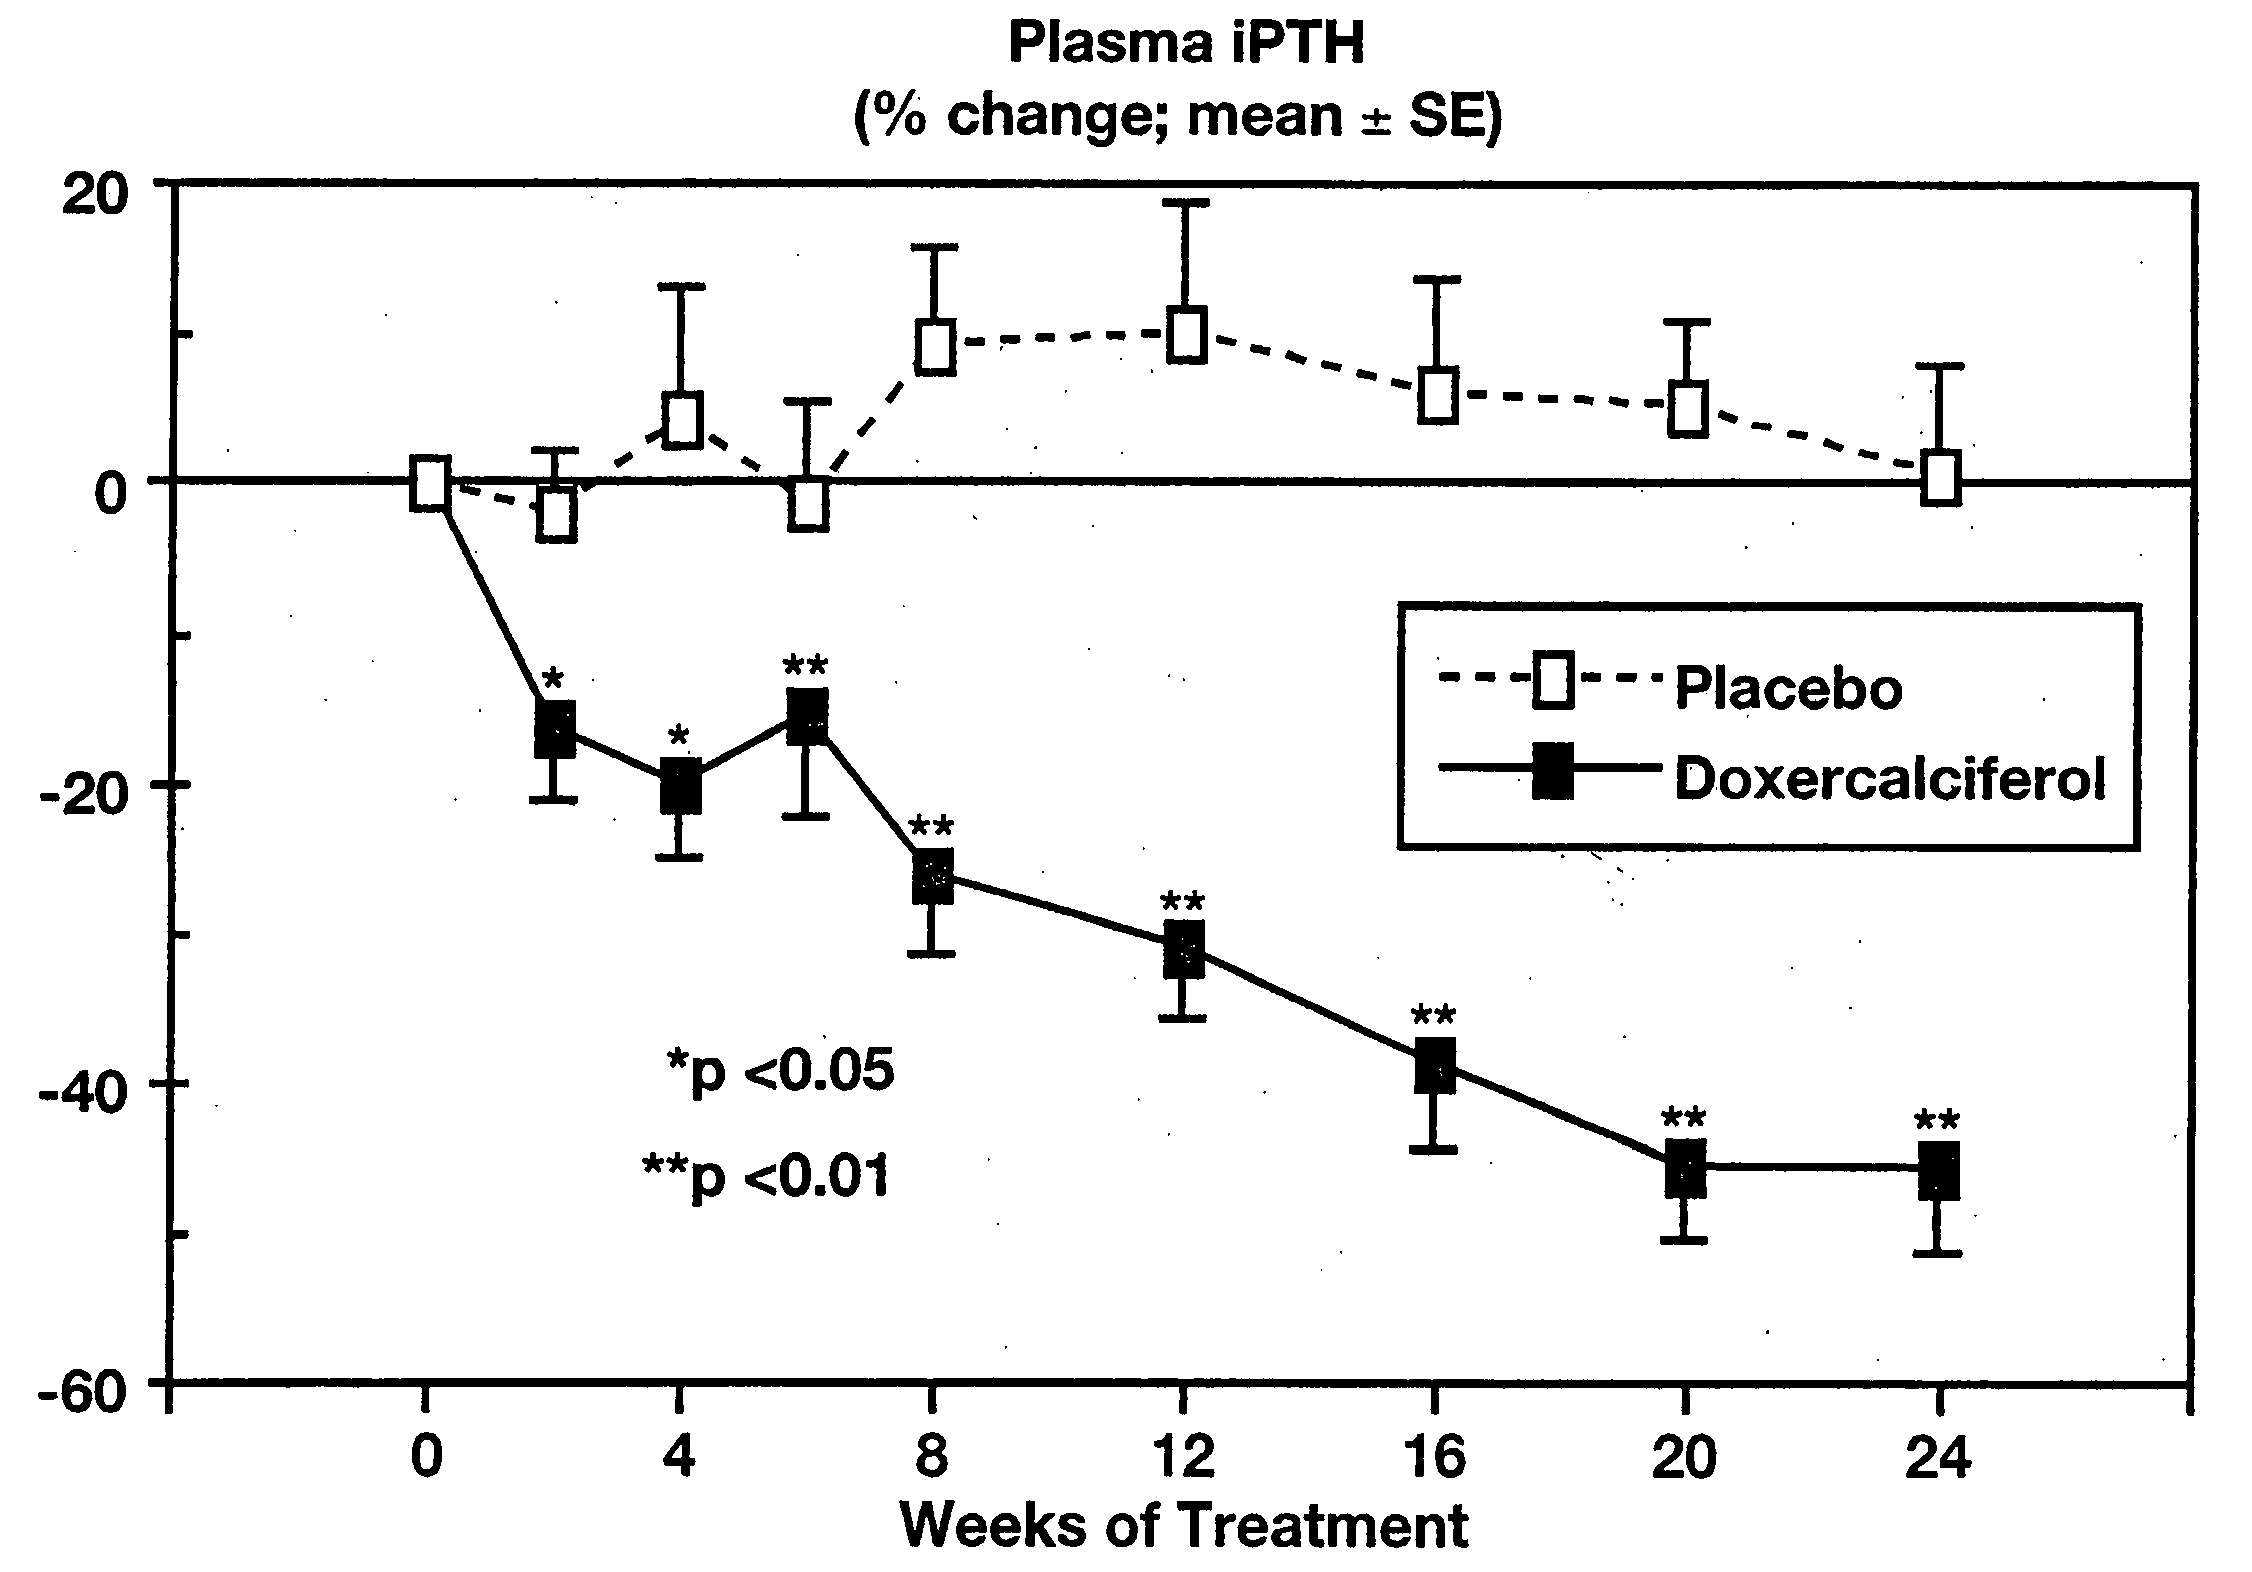 Methods of treating various vitamin D metabolism conditions with 1alpha-hydroxyvitamin D2